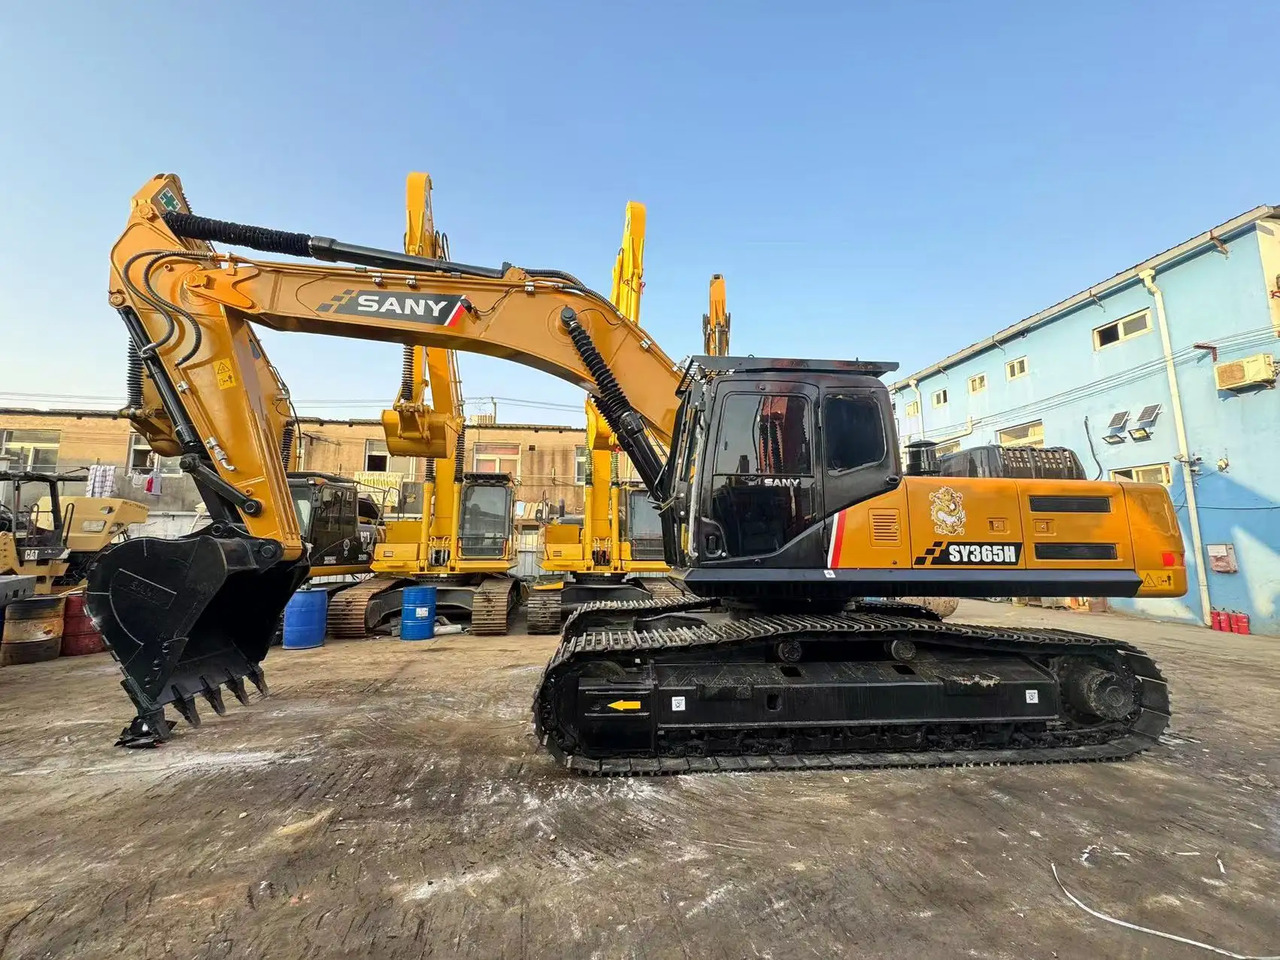 Bæltegravemaskine Hot sale Used 36 ton Excavator Machinery China Brand Sany 365H  with powerful digger construction machinery: billede 5